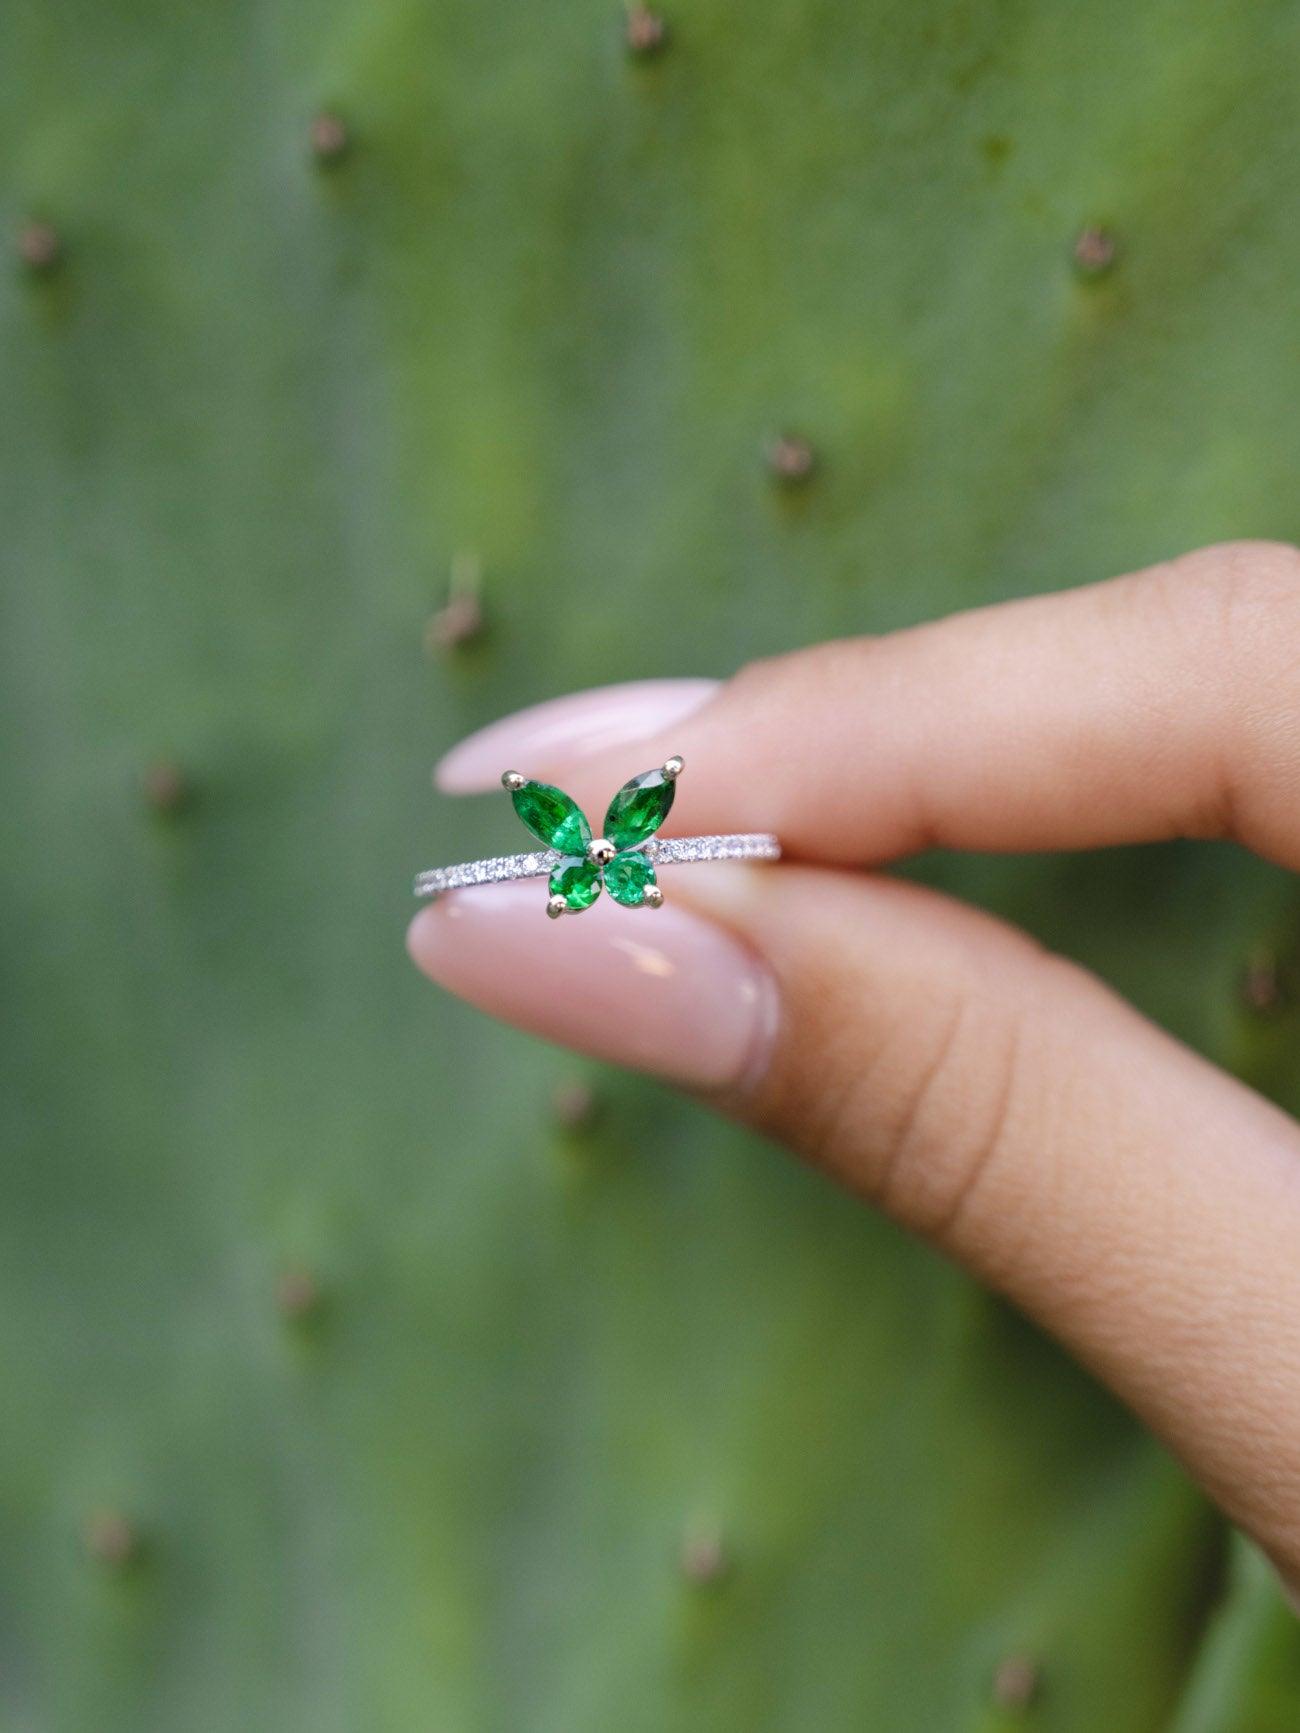 Butterfly Ring With White Gold, Diamonds And Emerald - Moregola Fine Jewelry